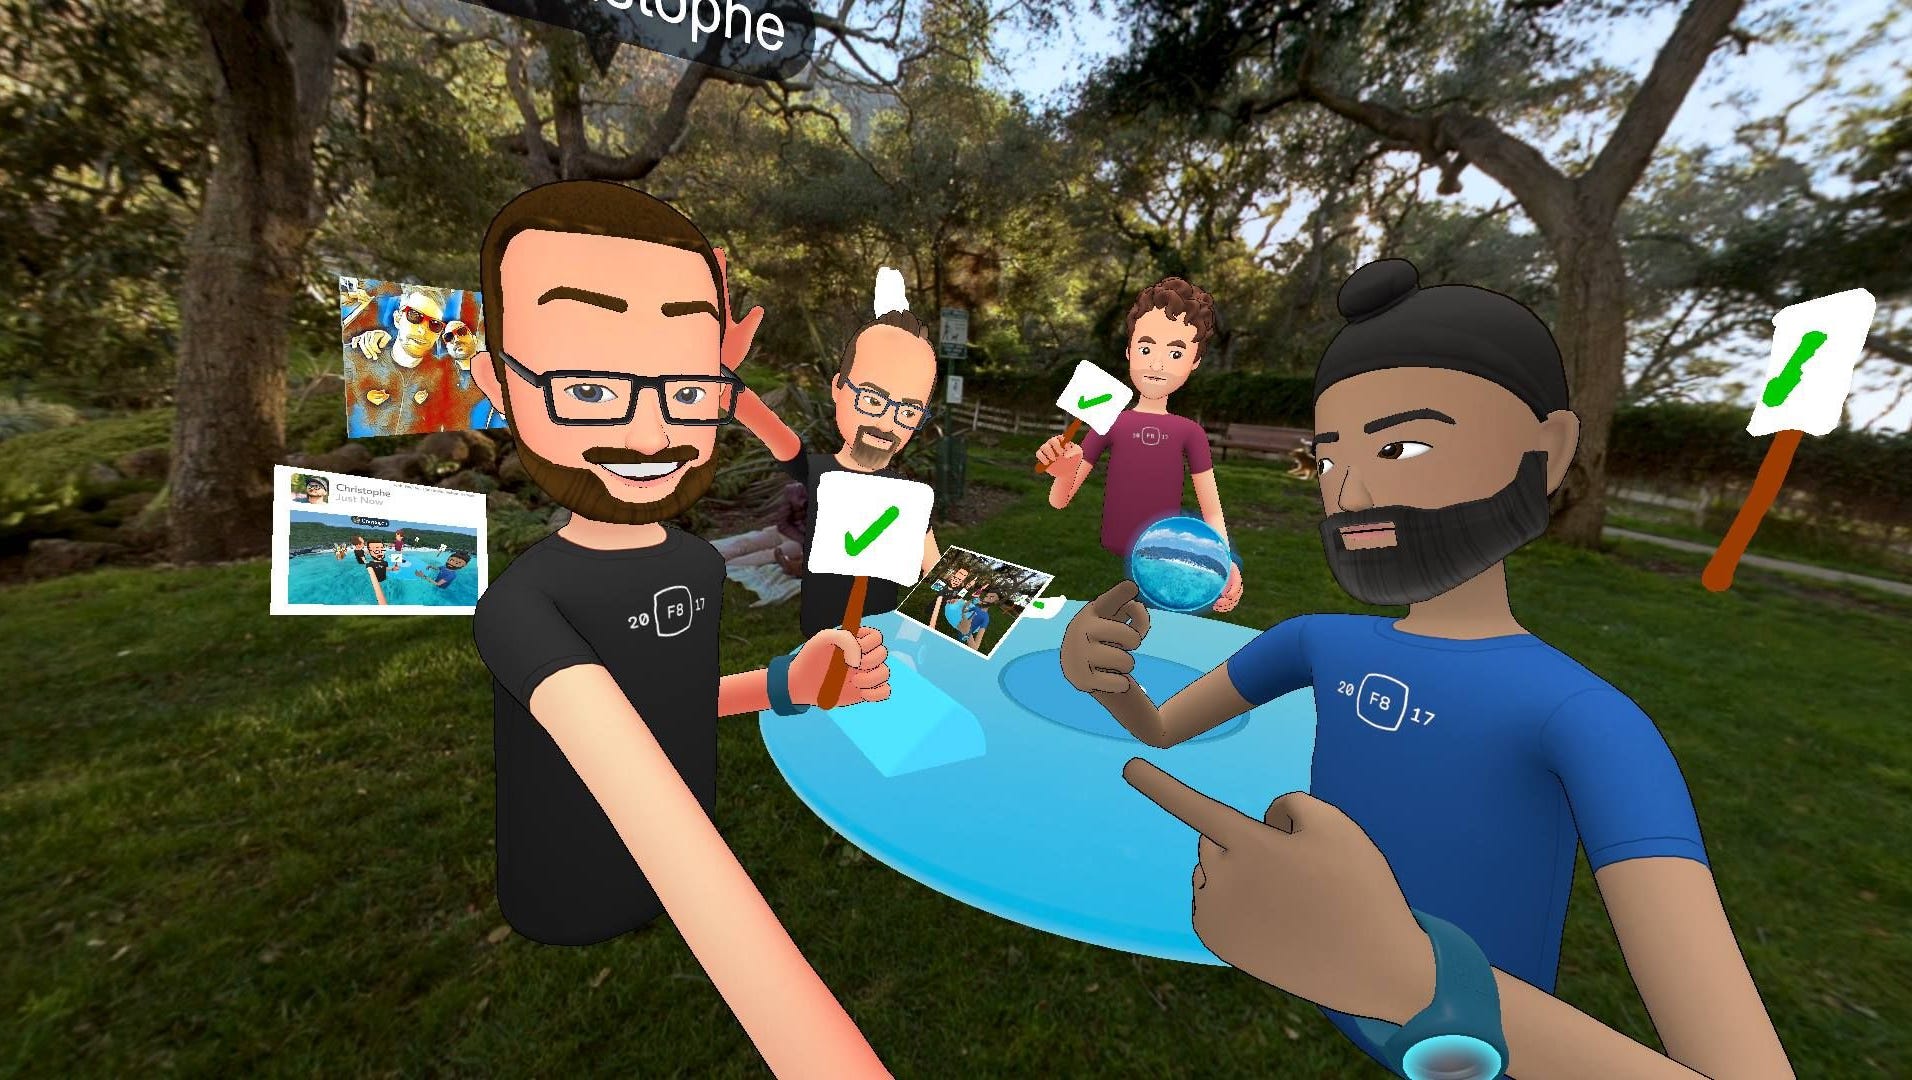 Your friends you) become cartoon avatars in Facebook virtual reality